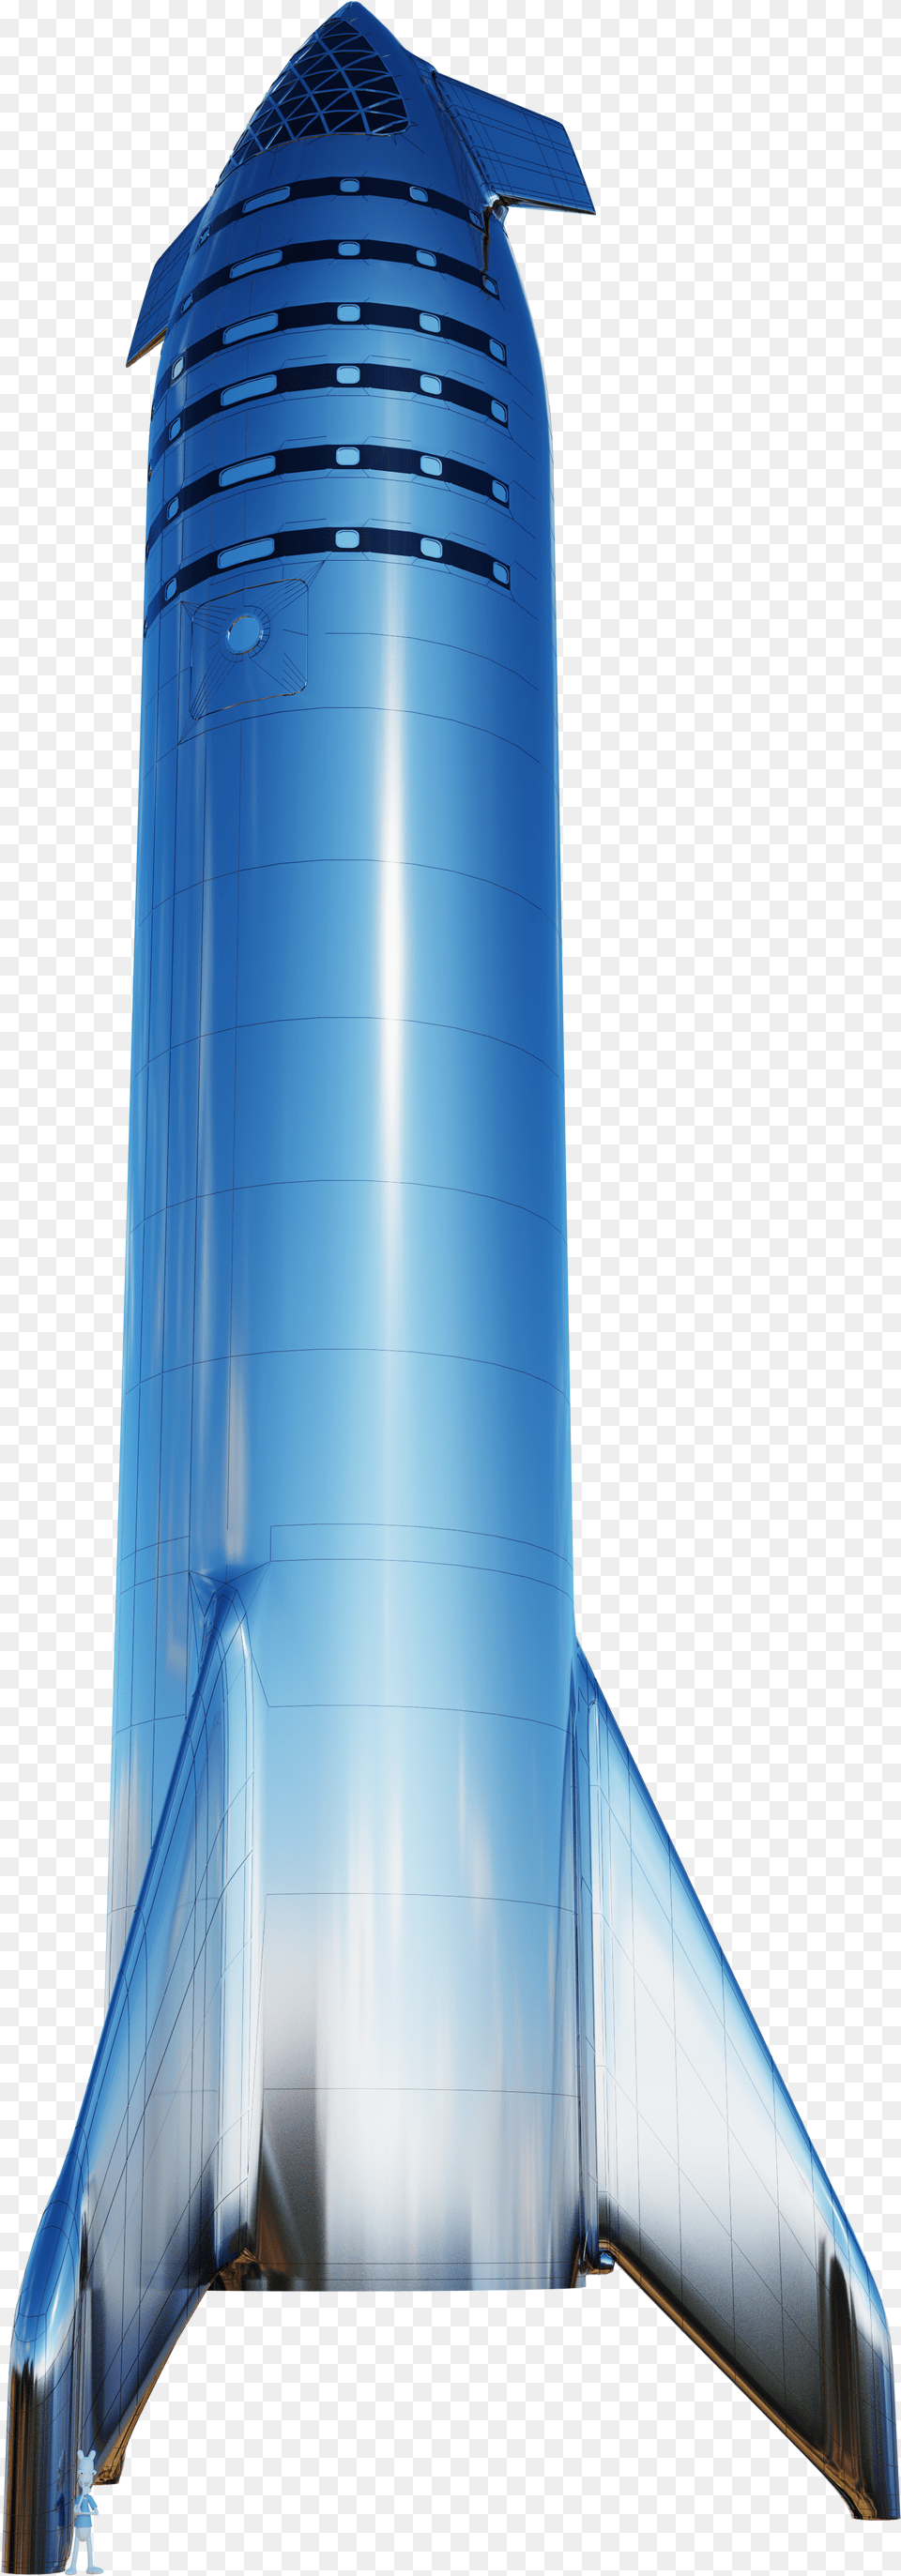 New Starship 3d Render From Yours Truly Spacexlounge Transparent Starship Spacex Png